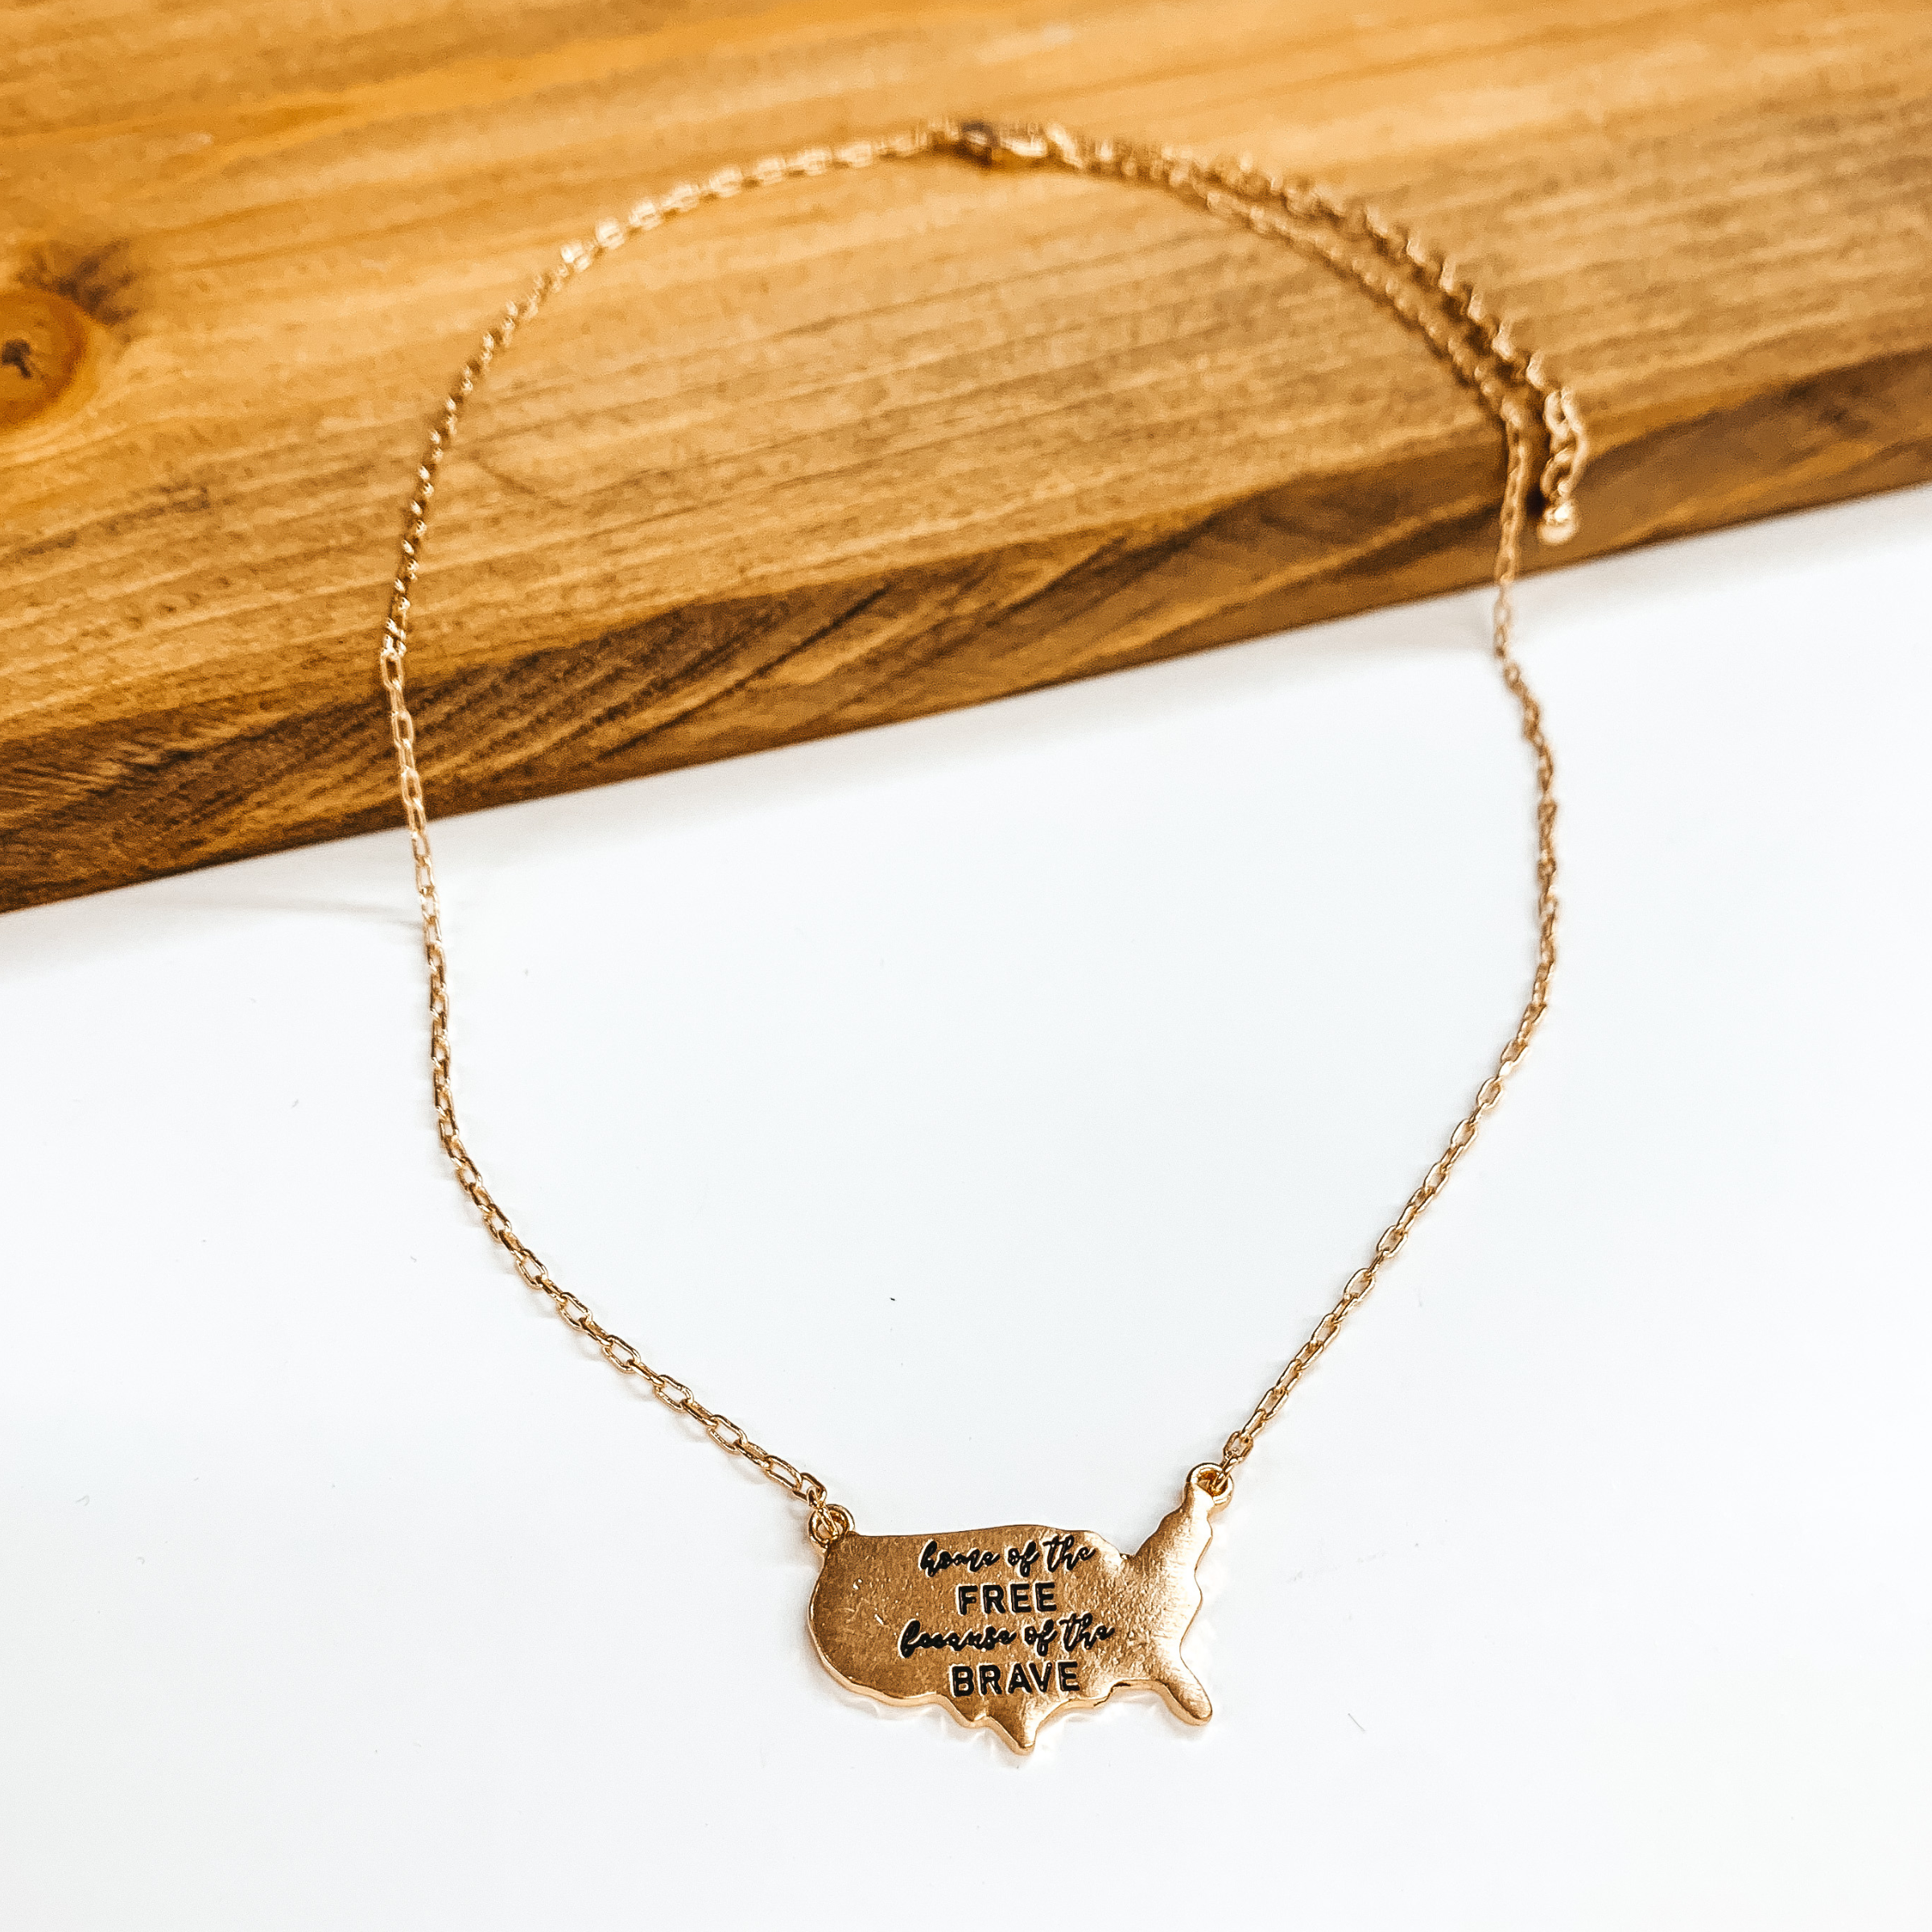 This a gold necklace with the USA country pendant,  the pendant says 'Home of the free because of the  brave'. This necklace is taken on a brown block  and a white background.